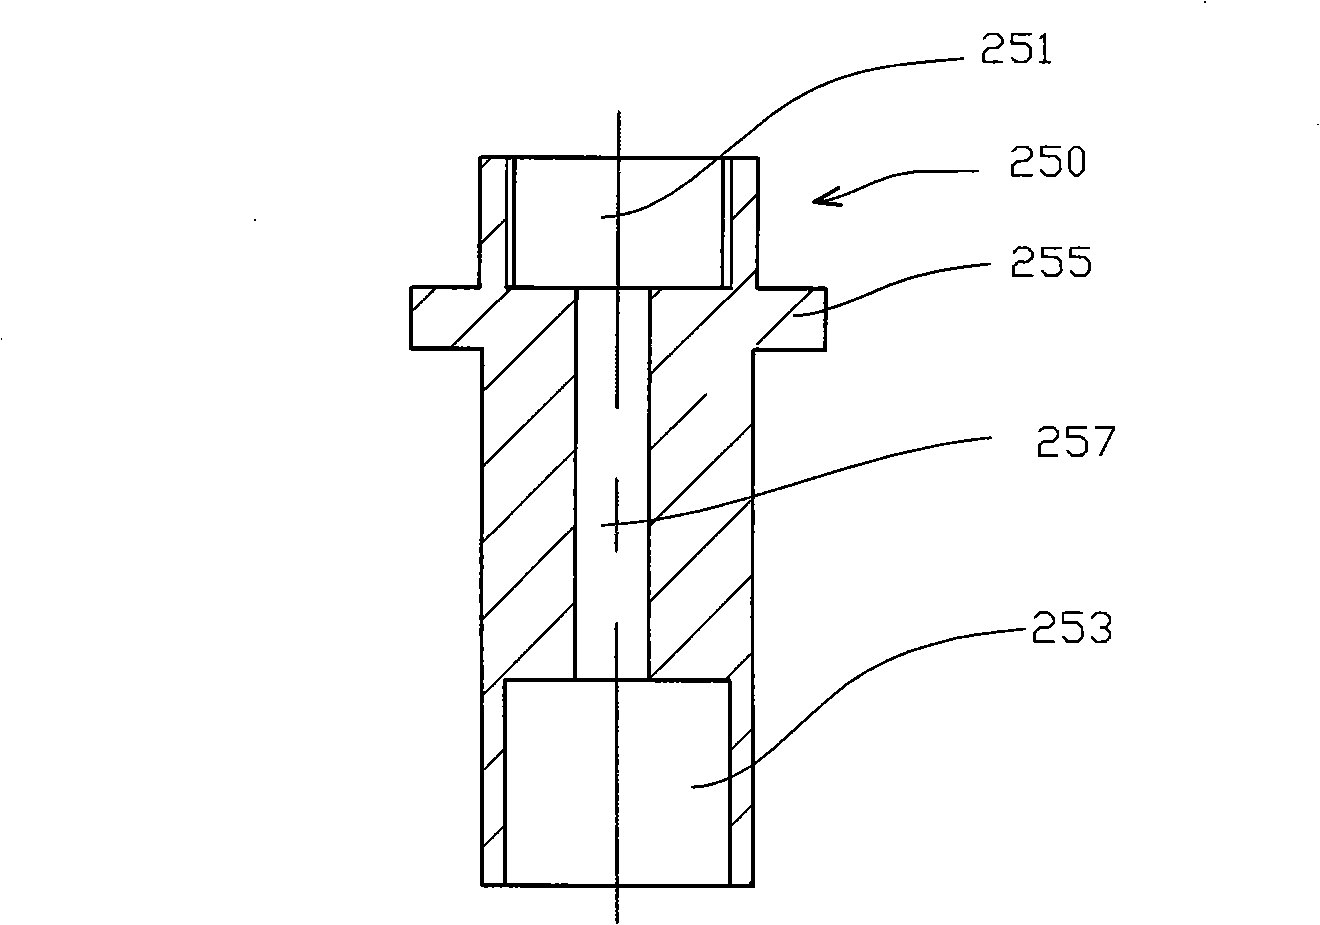 Optical display shielding machine and its electromagnetic shielding desk